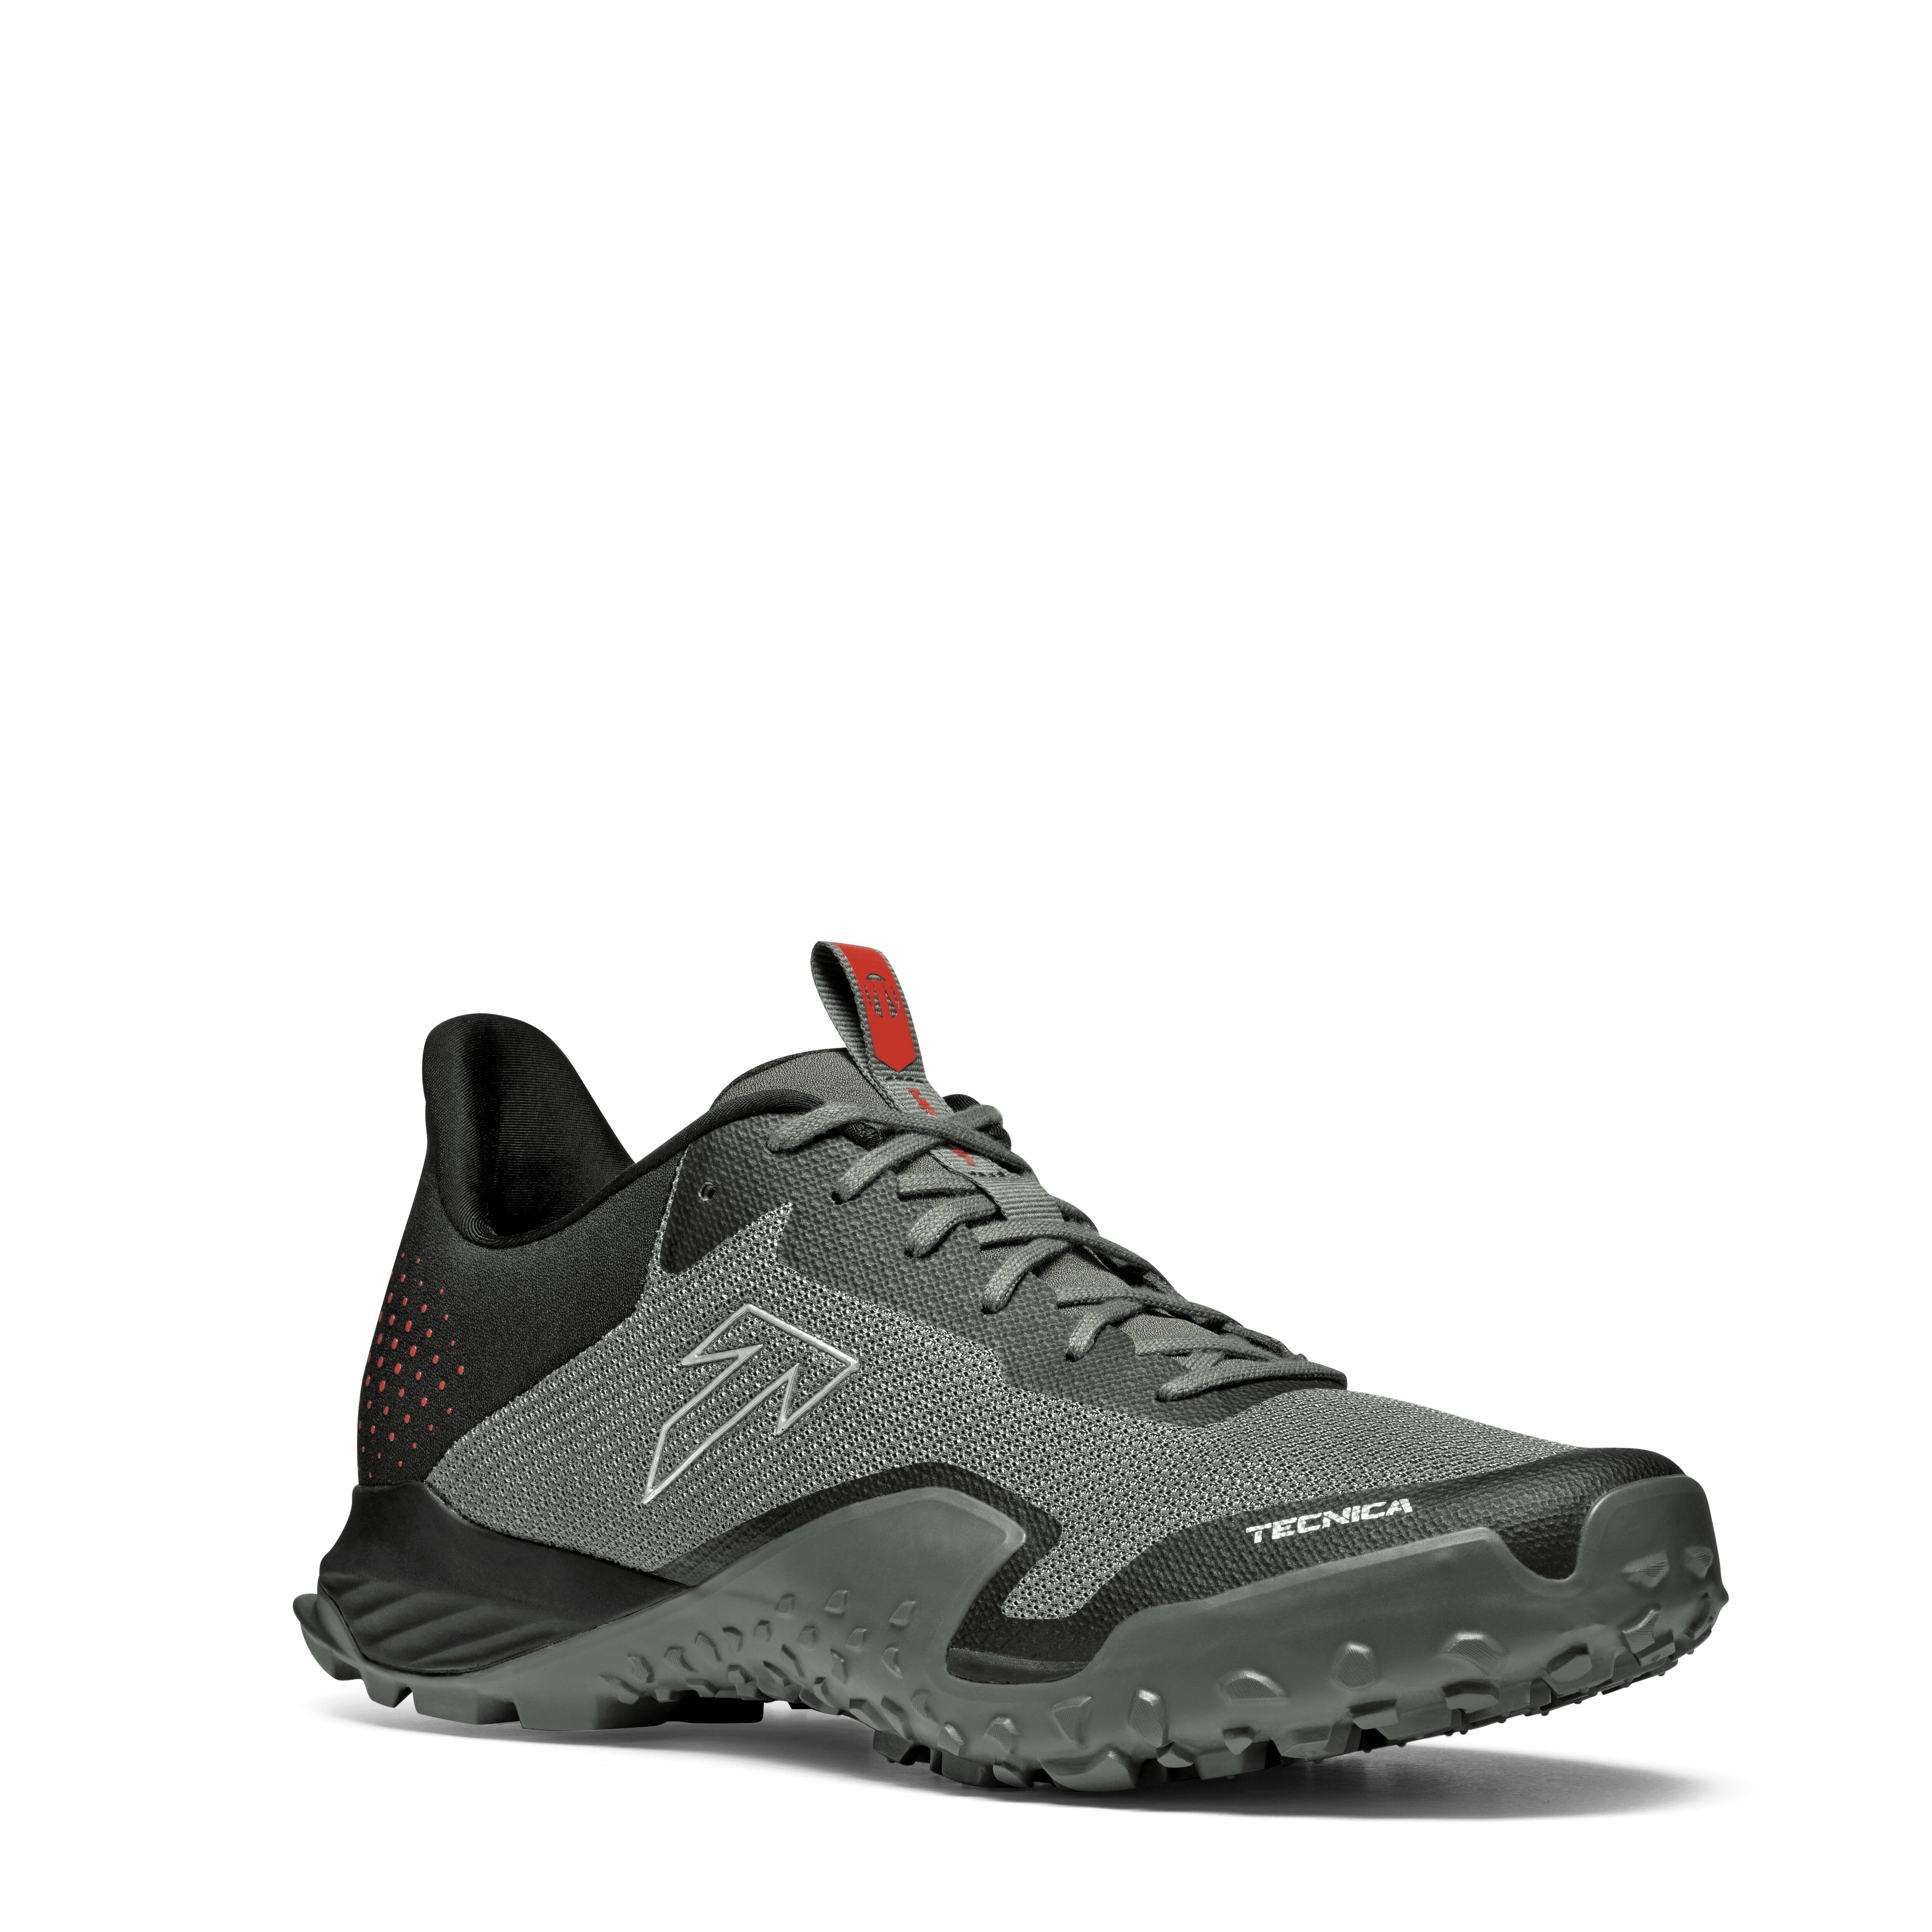 Tecnica Magma 2.0 S - Chaussures randonnée homme | Hardloop